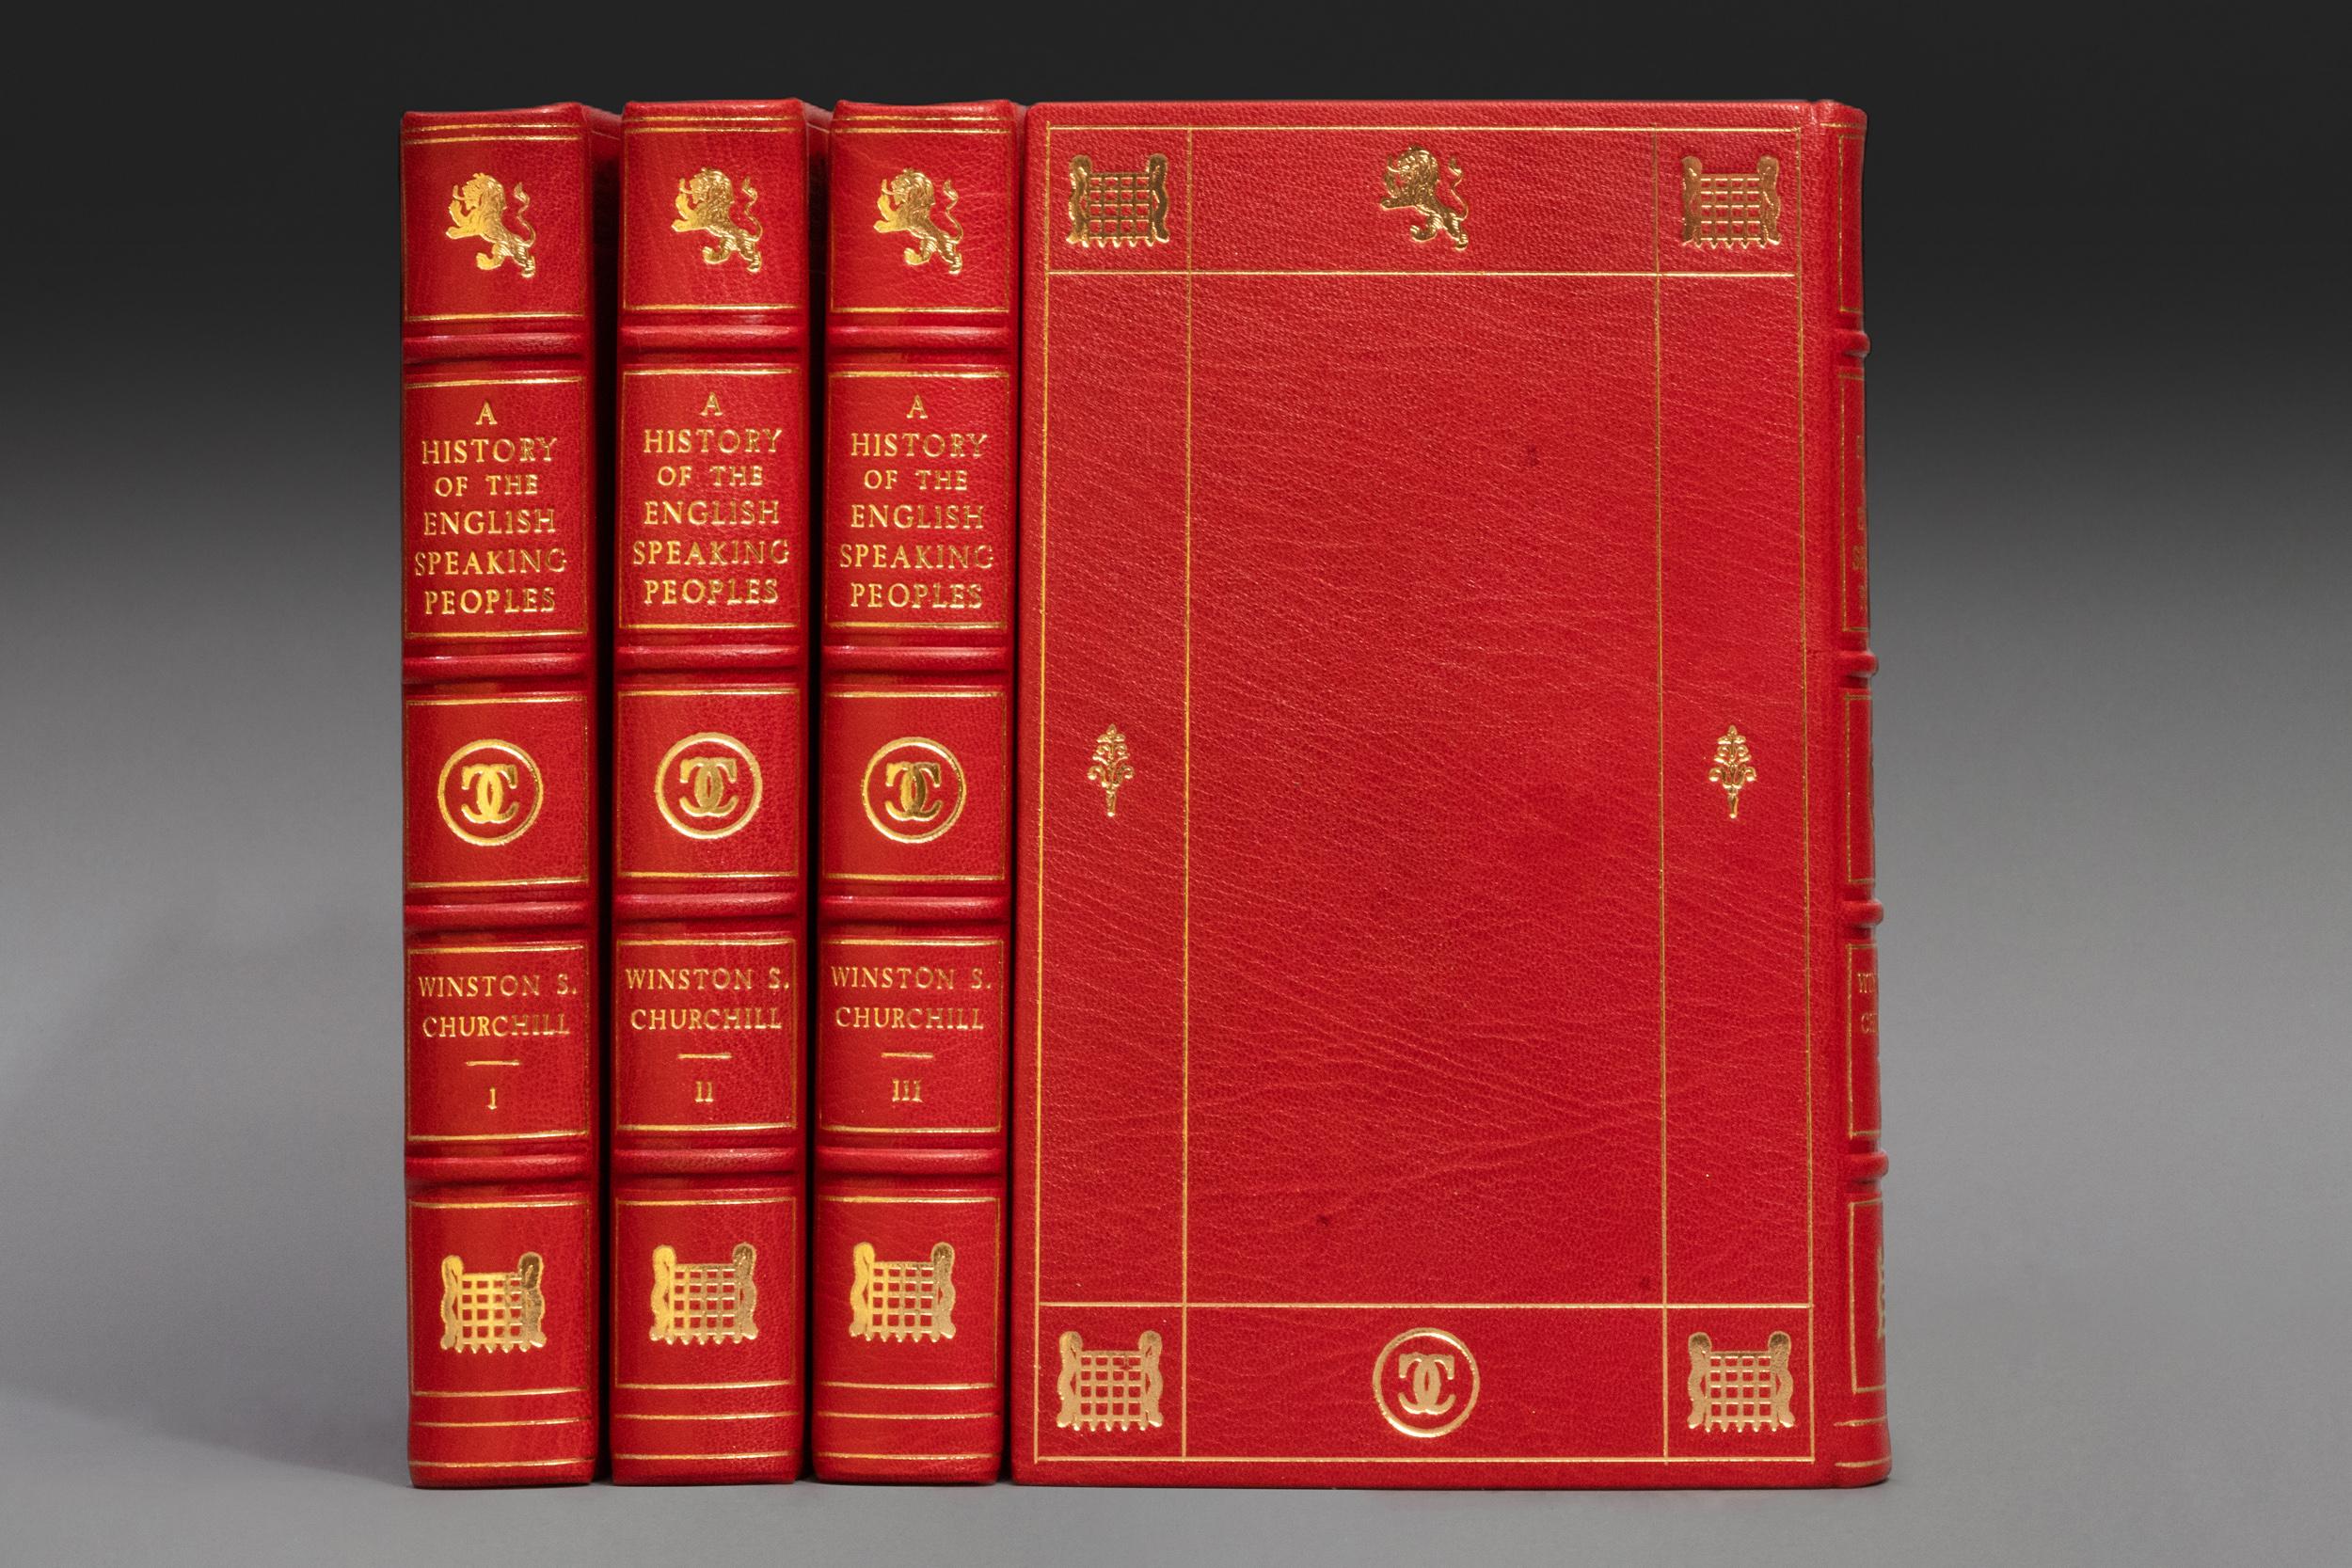 4 Volumes. Sir Winston S. Churchill, A History of the English Speaking Peoples. Rebound in full red morocco. All edges gilt. Raised bands. Ornate gilt on covers and spine. Illustrated. Marbled endpapers. Published: London; Cassell & Co. Ltd. First